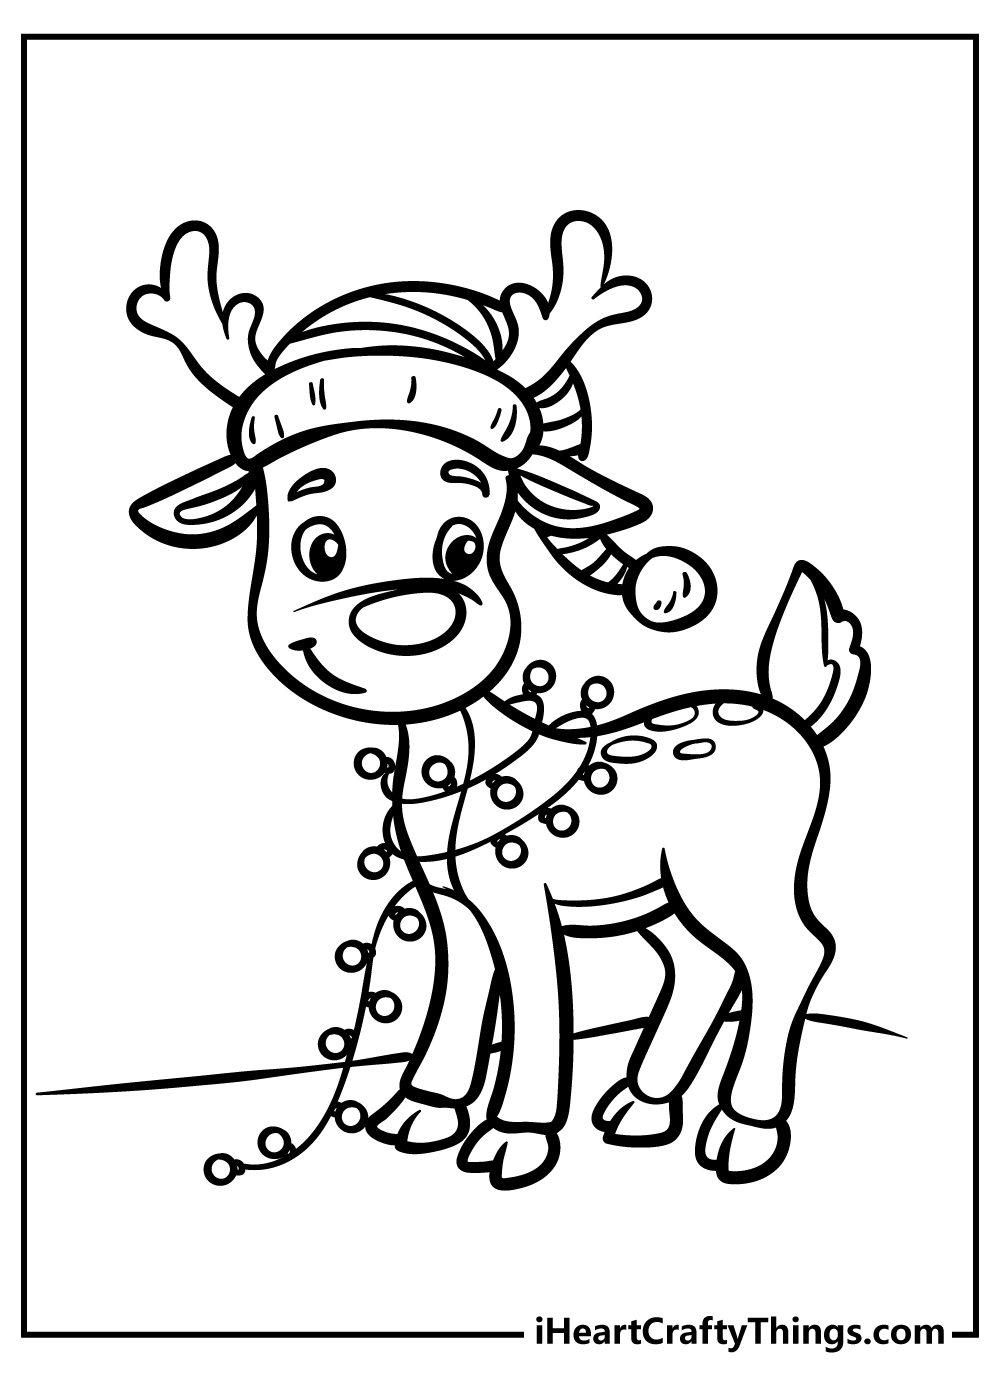 Rudolph Coloring Pages free pdf download